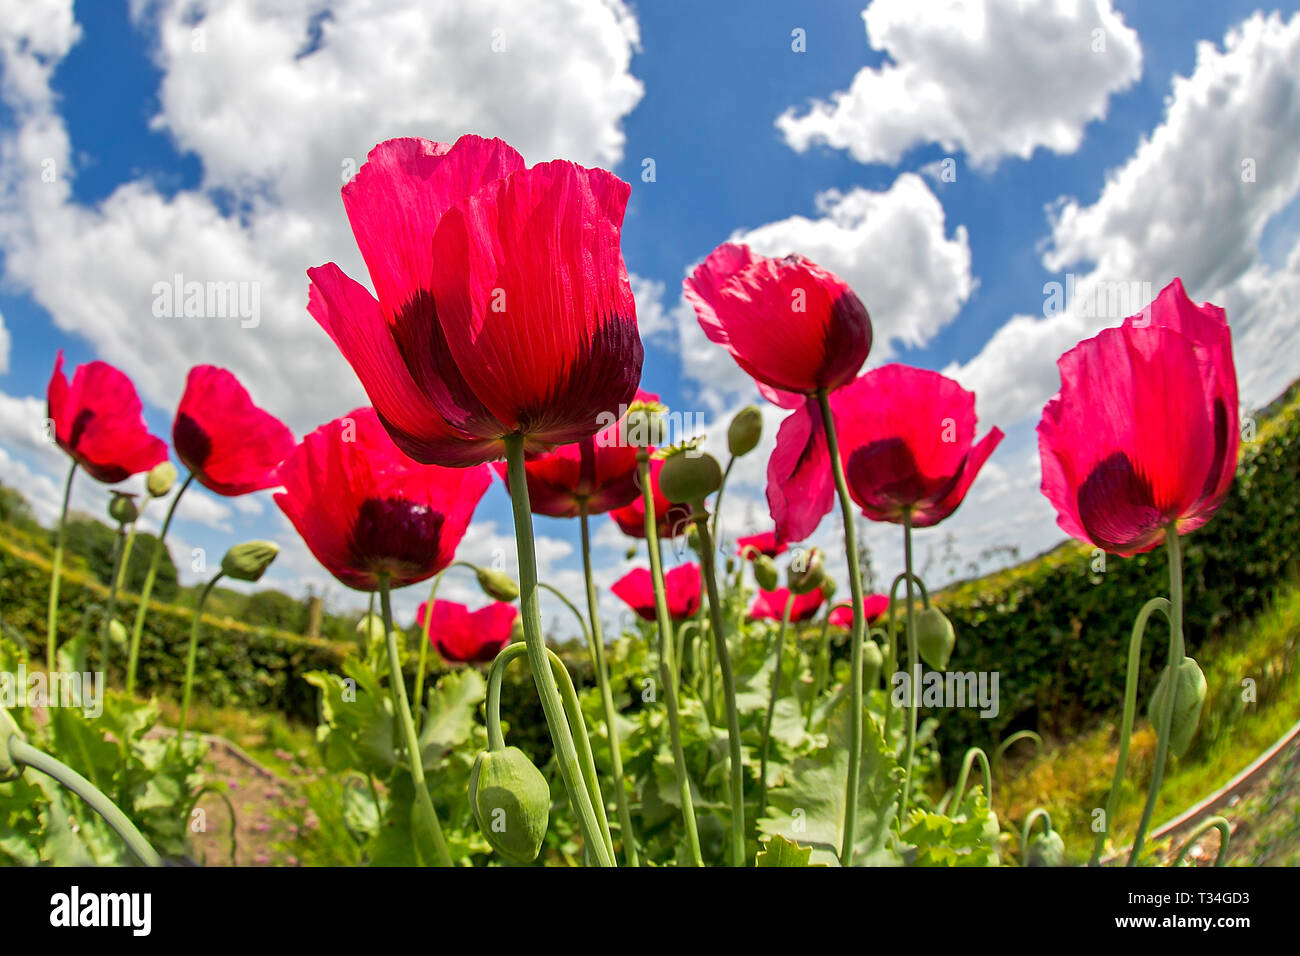 A group of red garden poppies with a blue sky and fair weather clouds representing a perfect summers day in the UK. Stock Photo